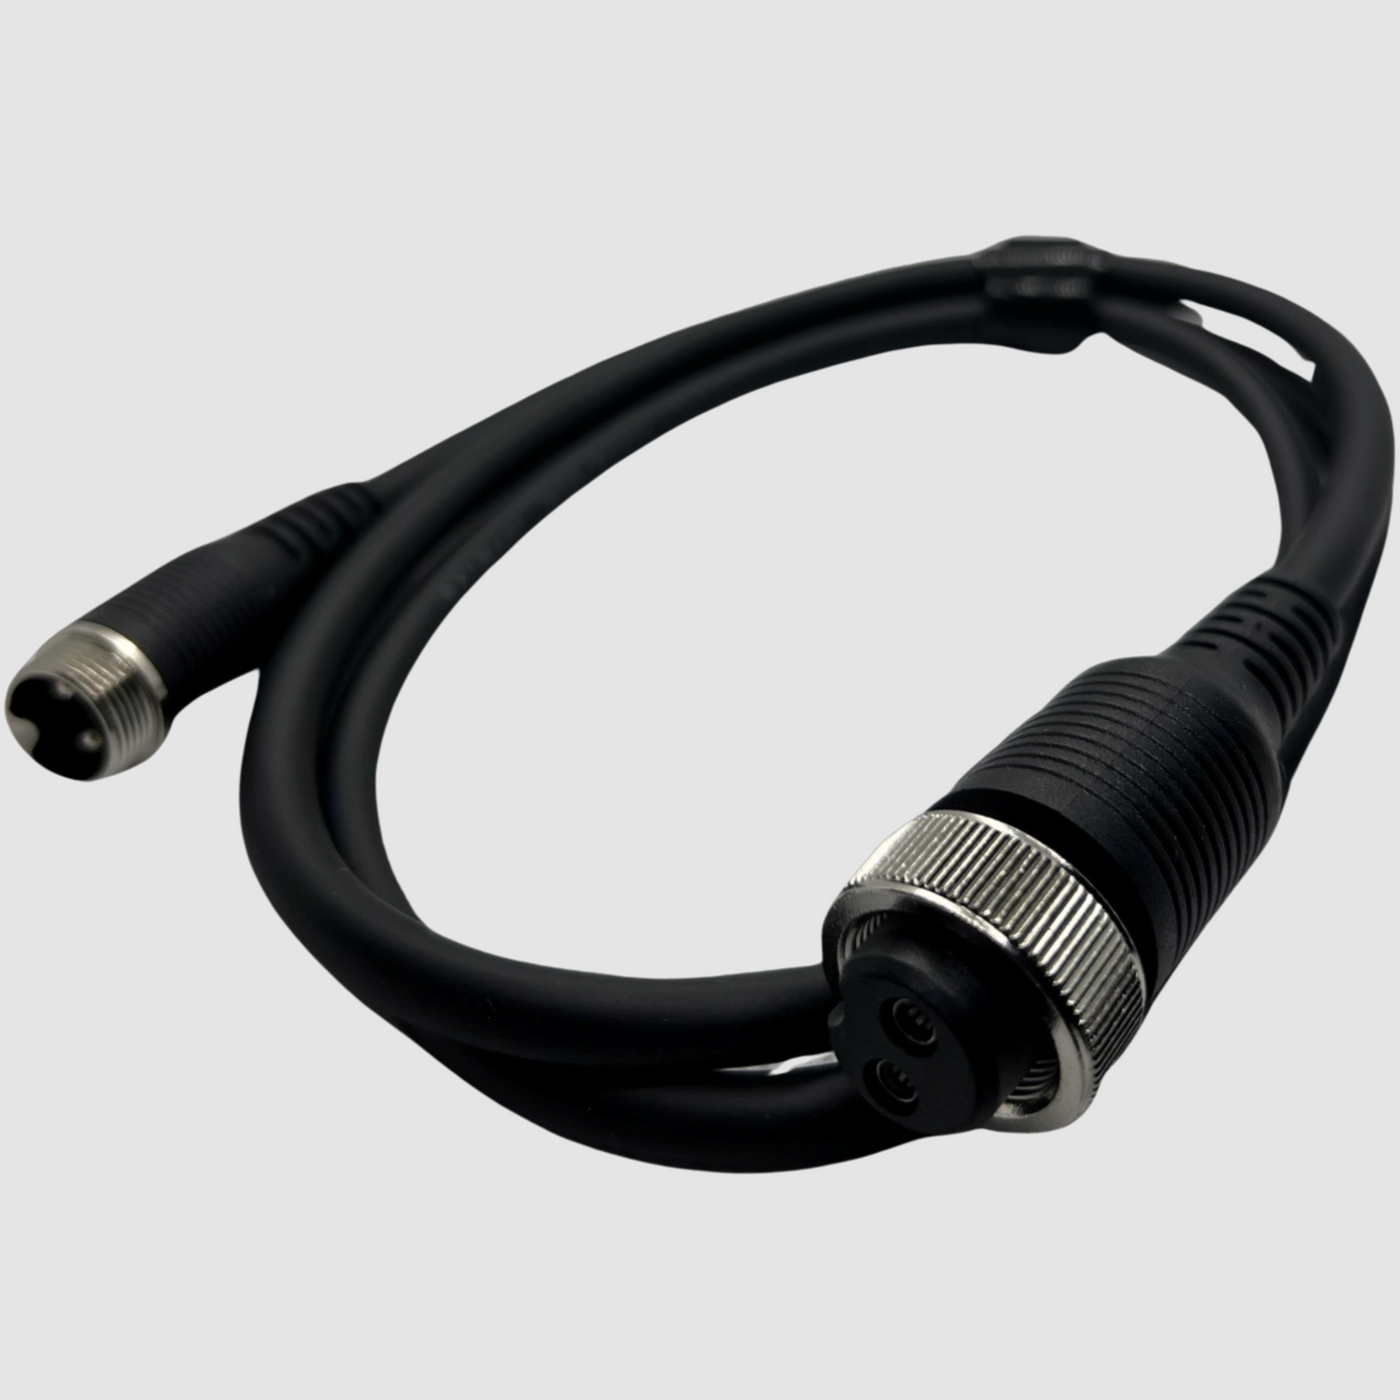 5.5’ Foot Adapter Cable - Seaborg 800-1200 MJ MP3000